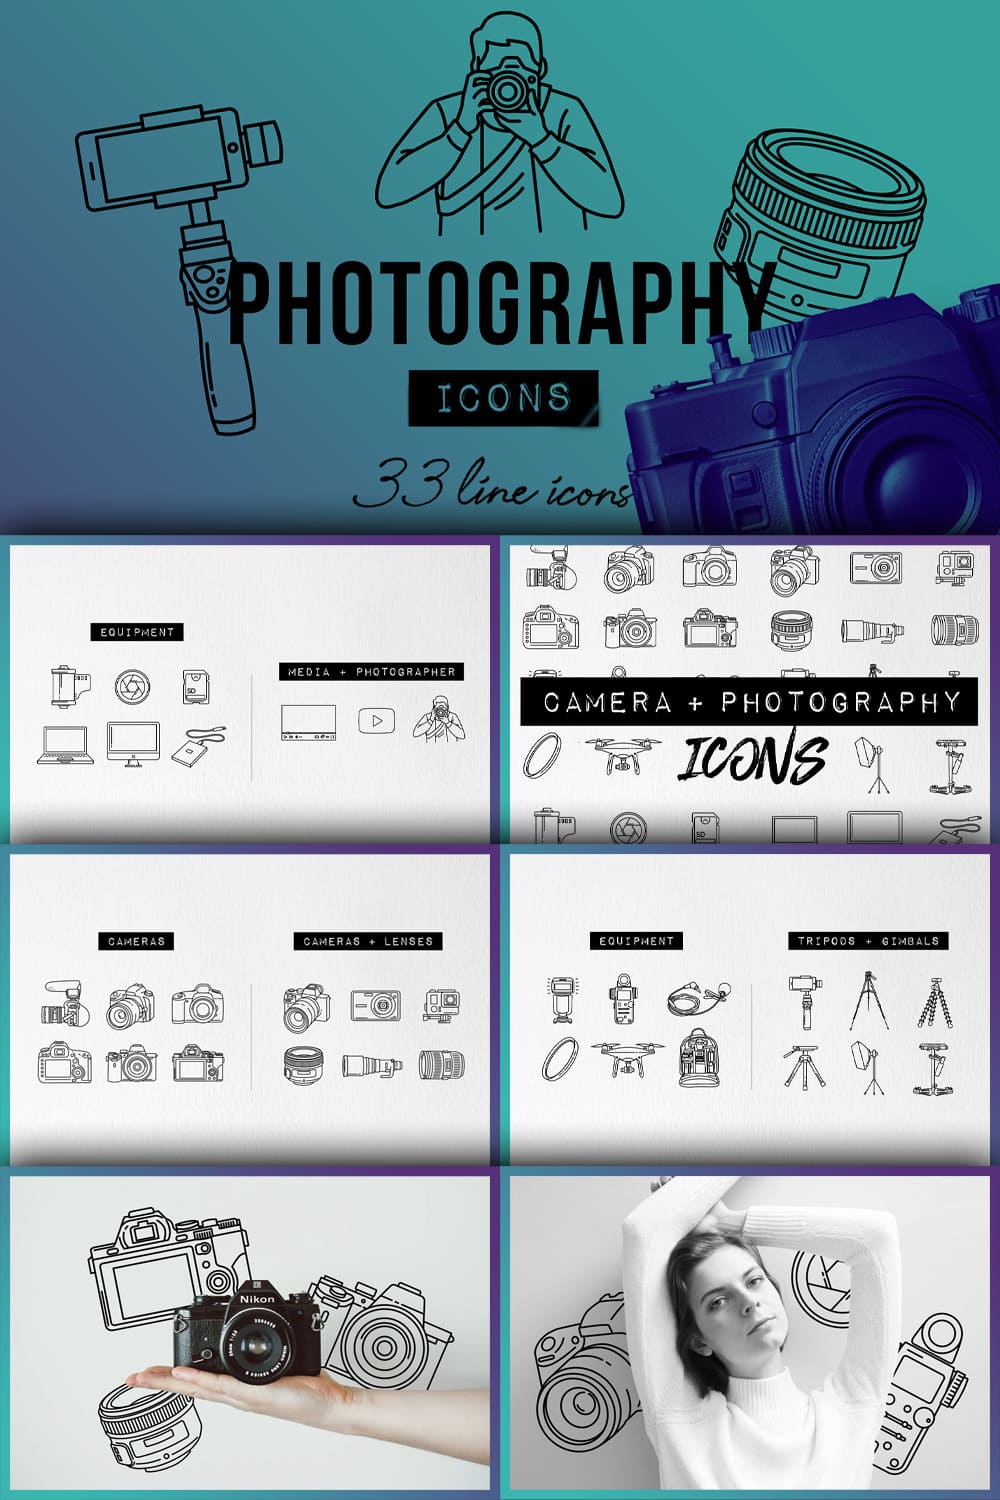 Icons with equipment for creating photos and an icon with the image of a photographer are depicted on a blue-purple background.